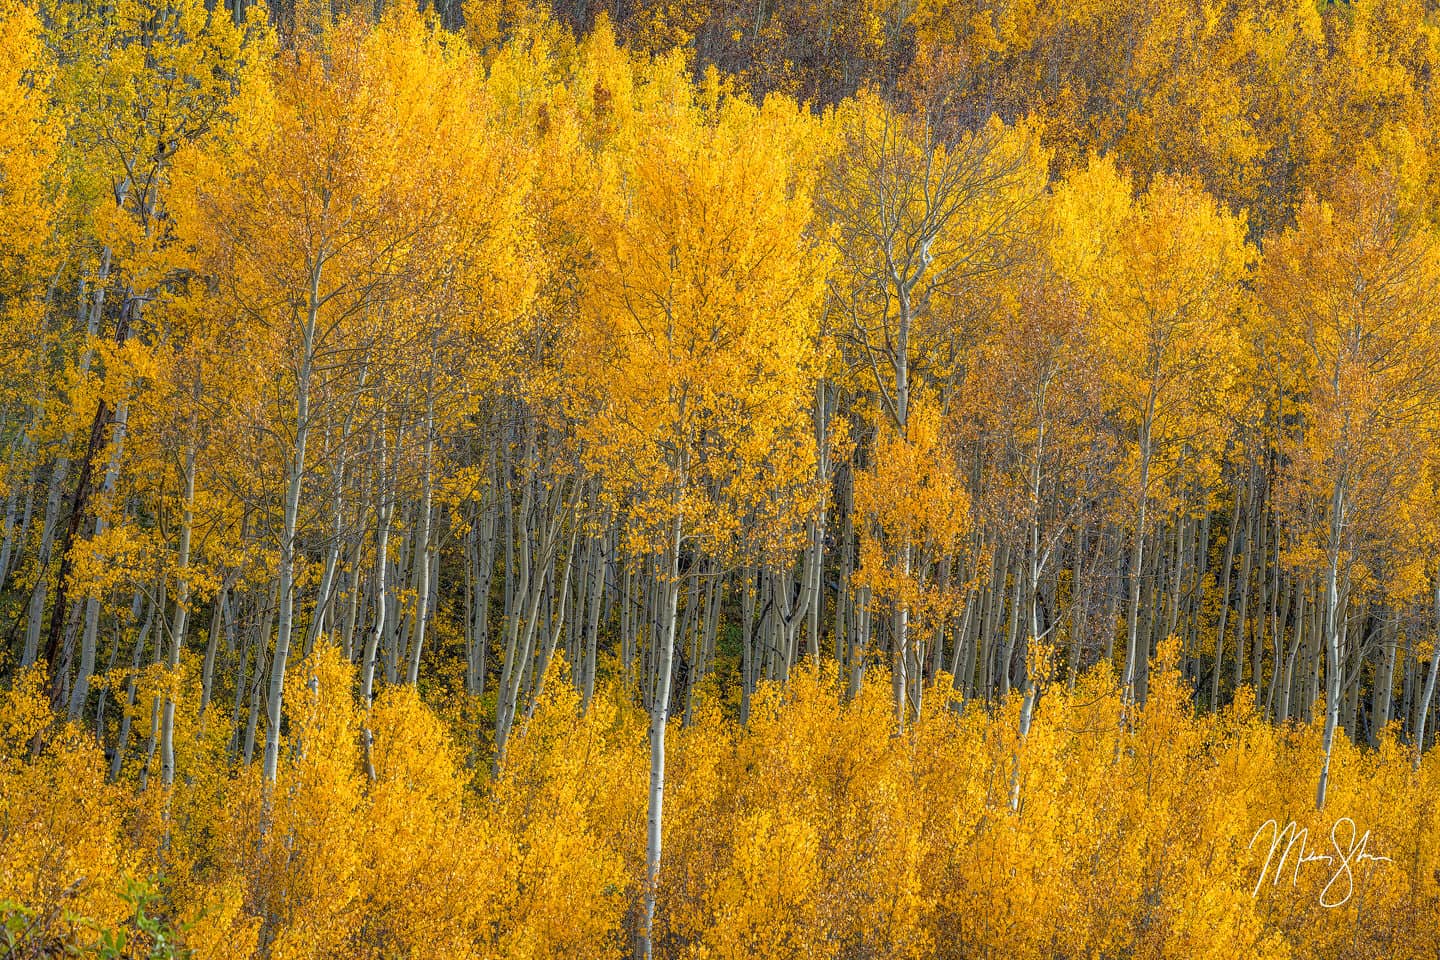 An intimate scene of aspen trees at the height of autumn colors in the Colorado Rockies